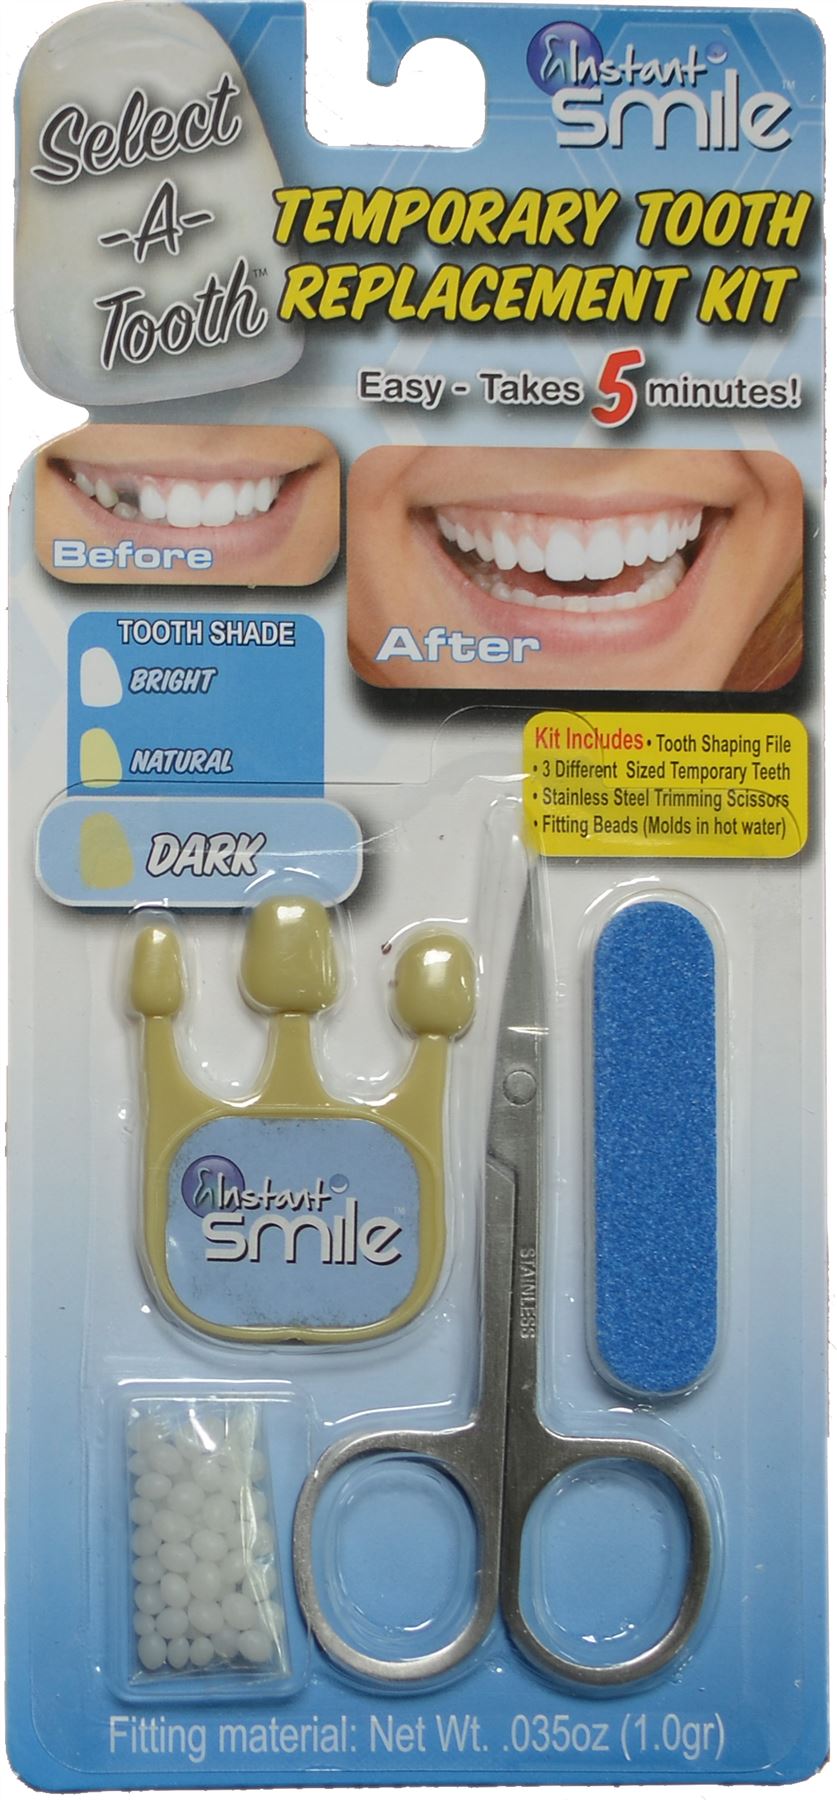 Instant Smile Temporary Tooth Replacement Kit - Walter Drake